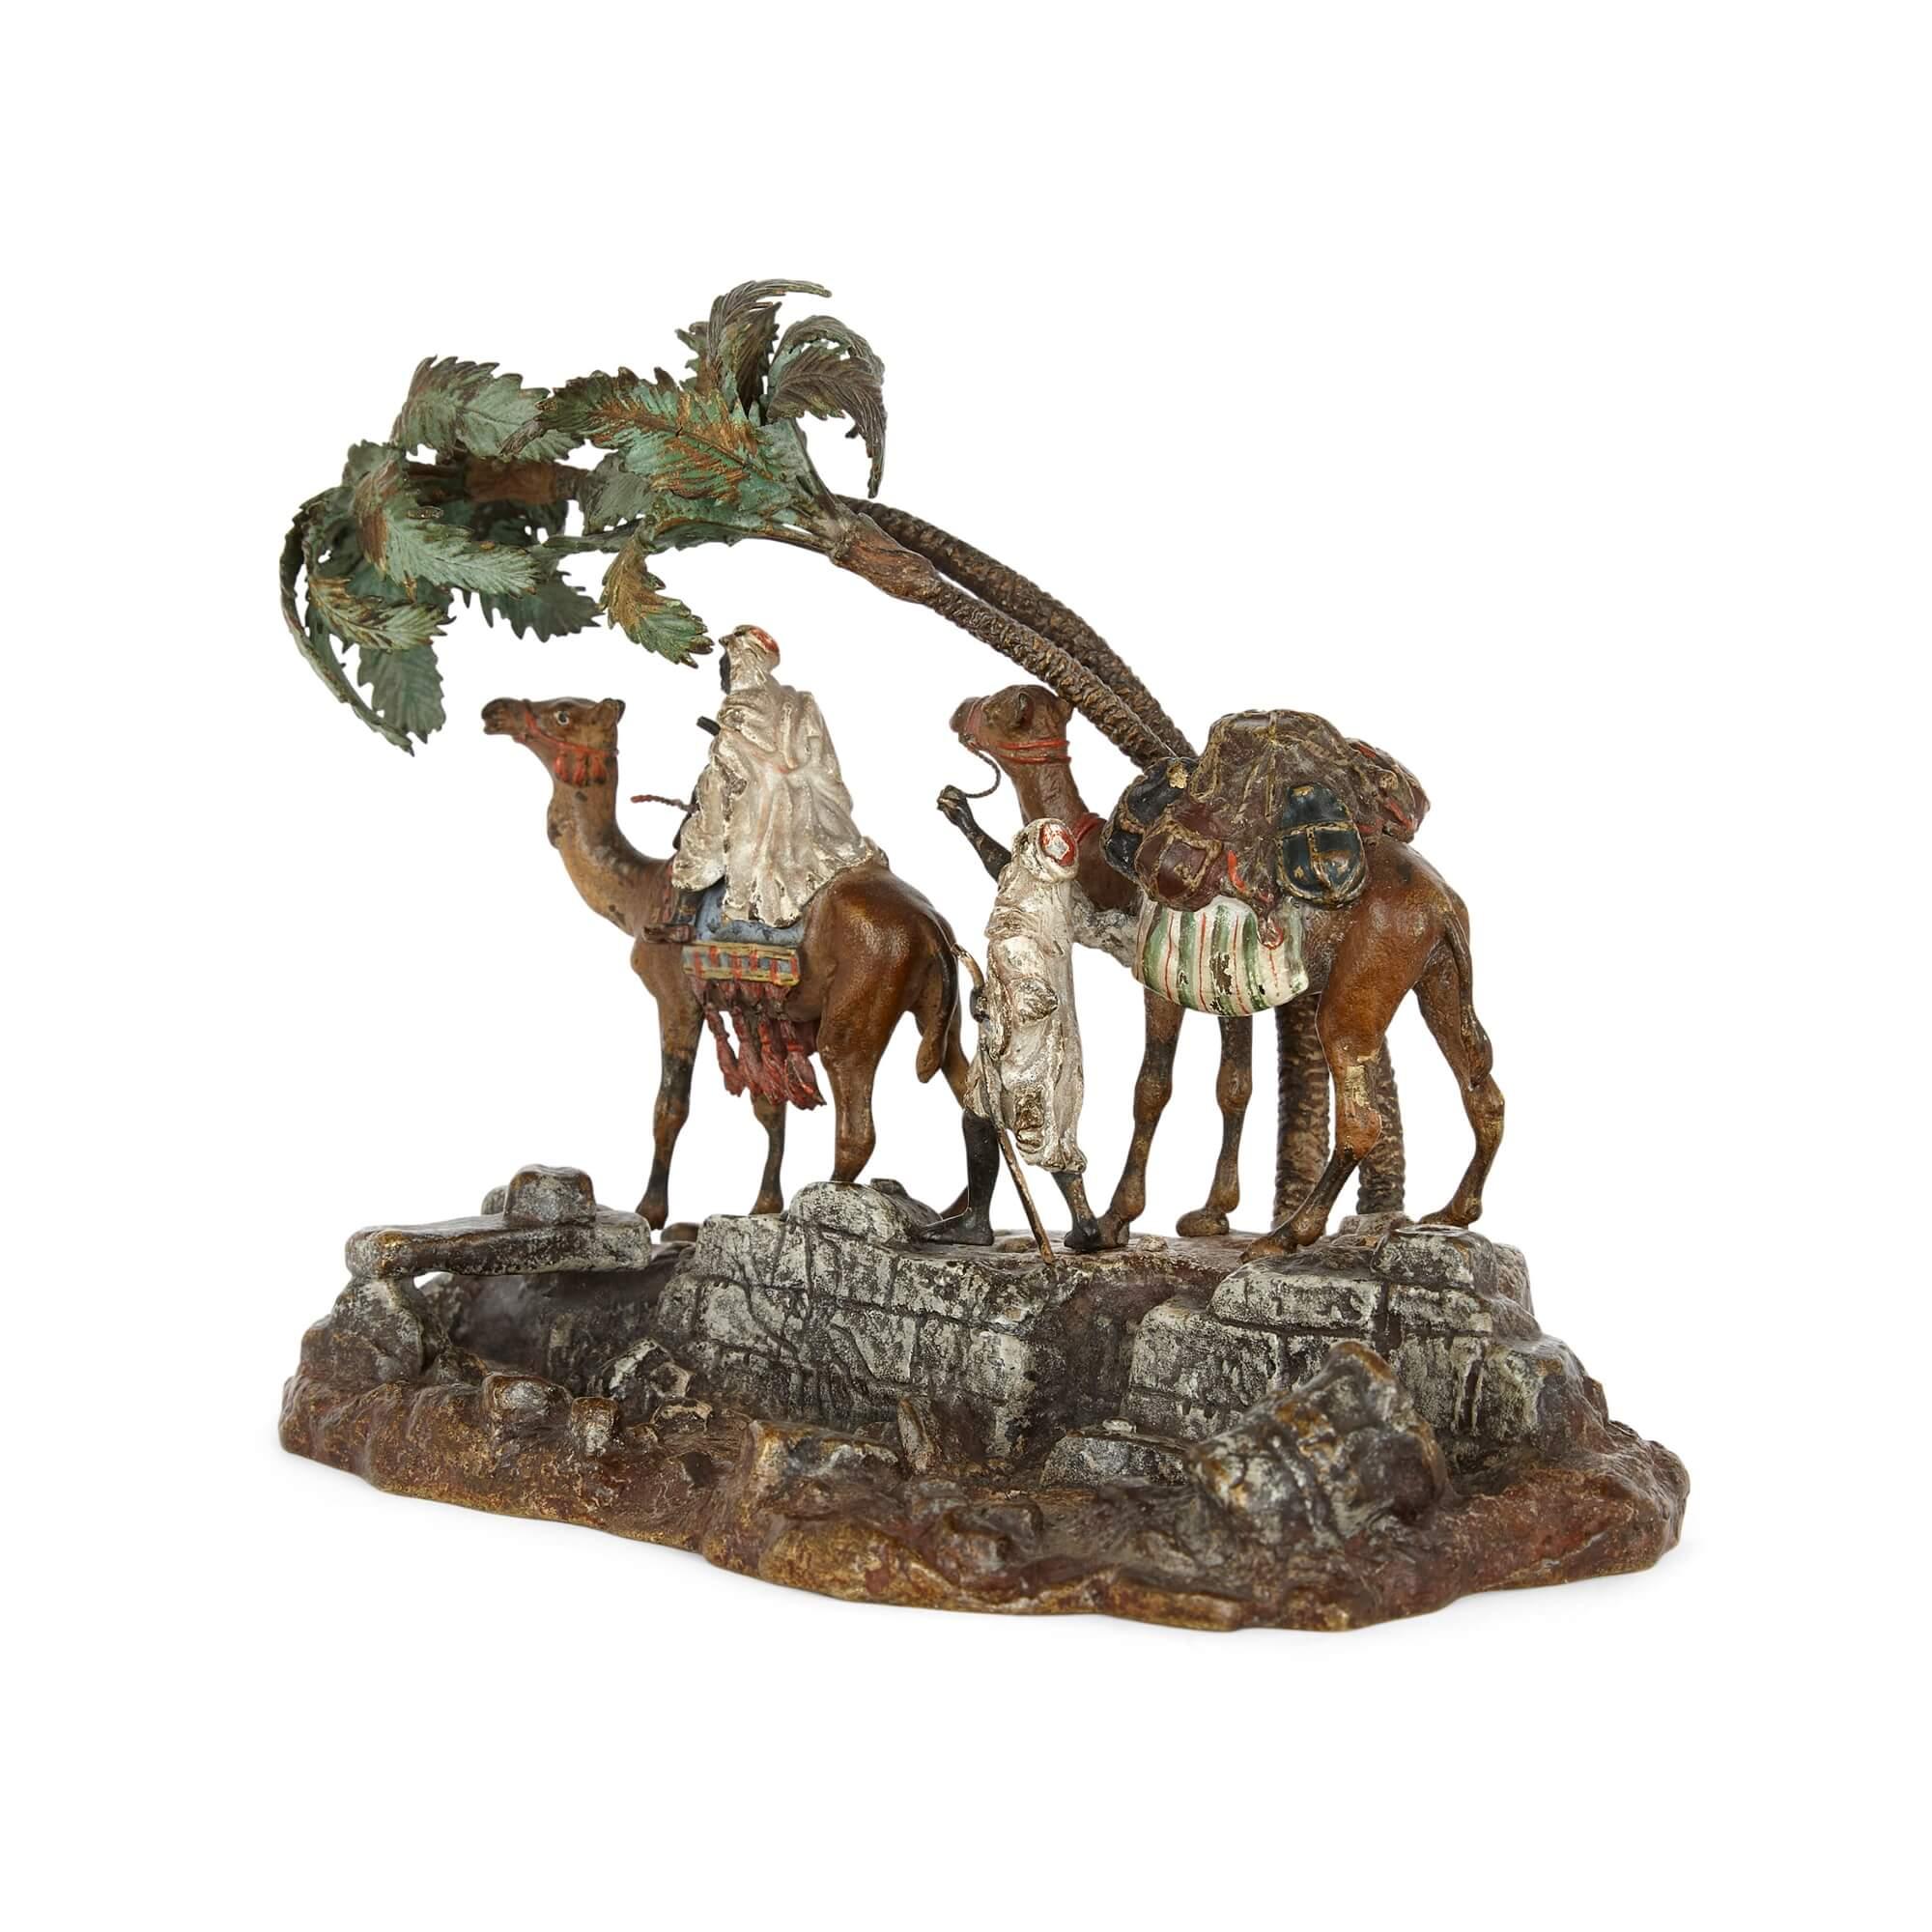 Viennese cold-painted Orientalist bronze group by Franz Bergman
Austrian, c.1900
Height 12cm, width 15cm, depth 9cm

This small but intricately crafted and designed bronze group depicts an Orientalist scene with two Arabian men and camels in a